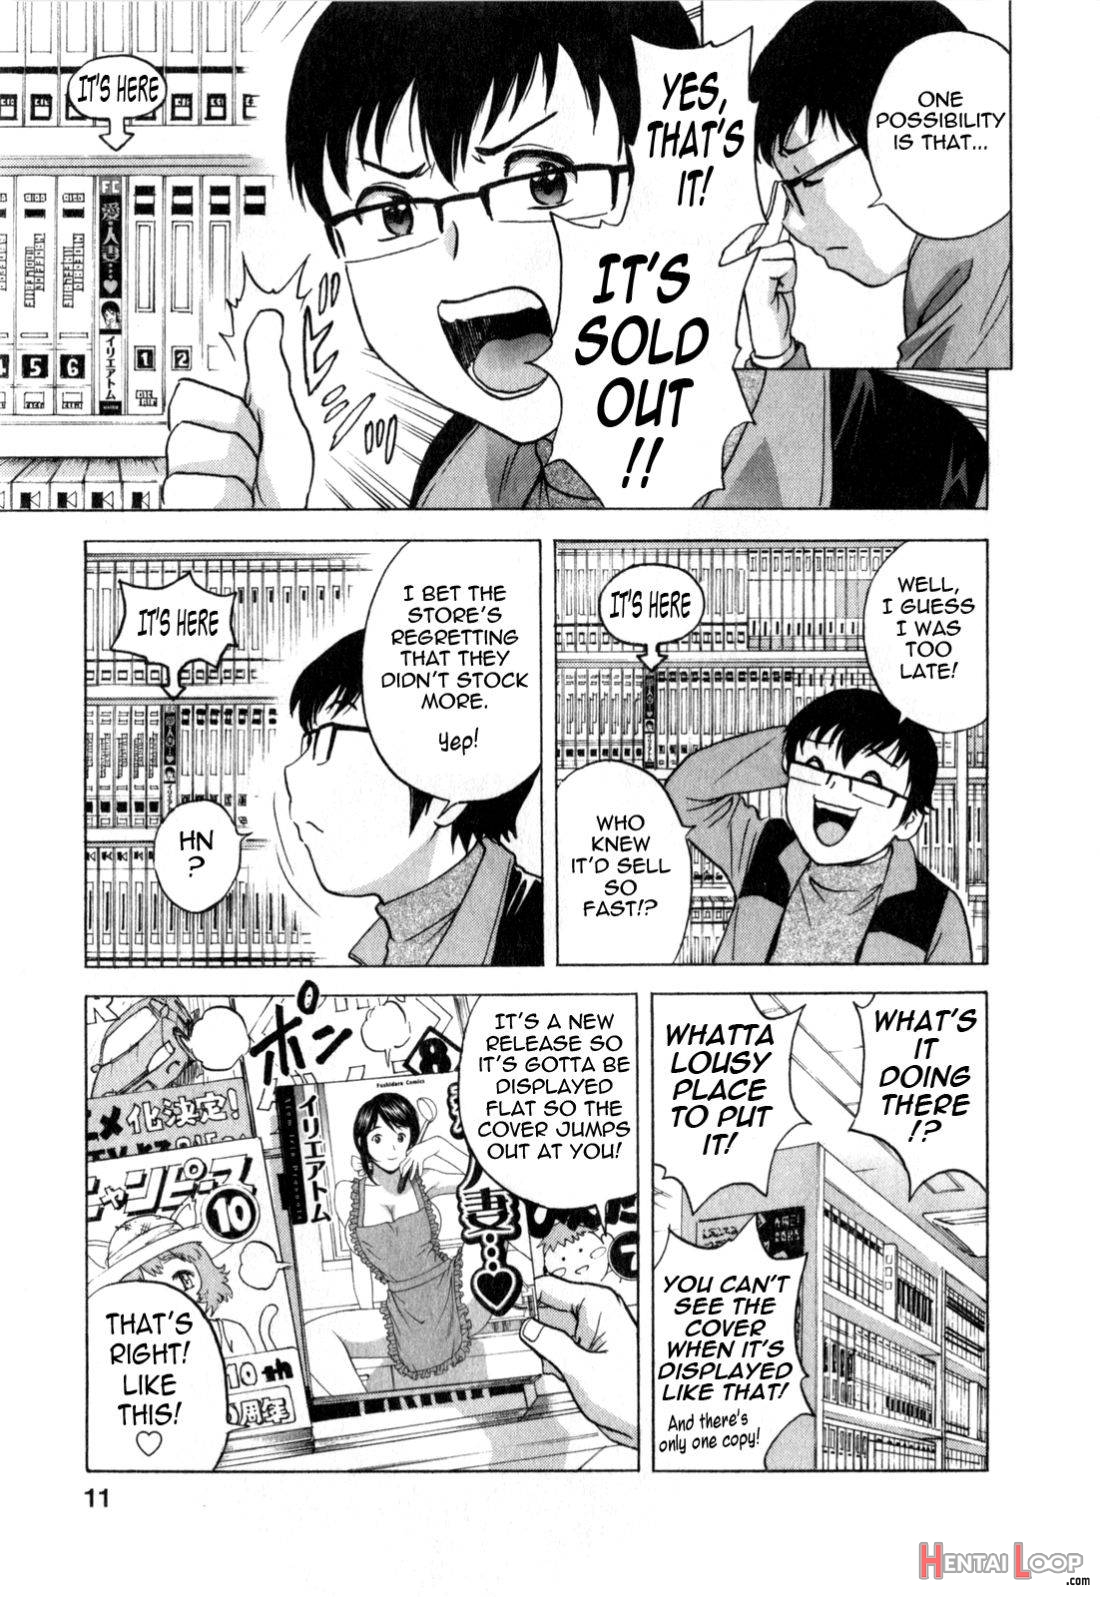 Life With Married Women Just Like A Manga 3 page 9